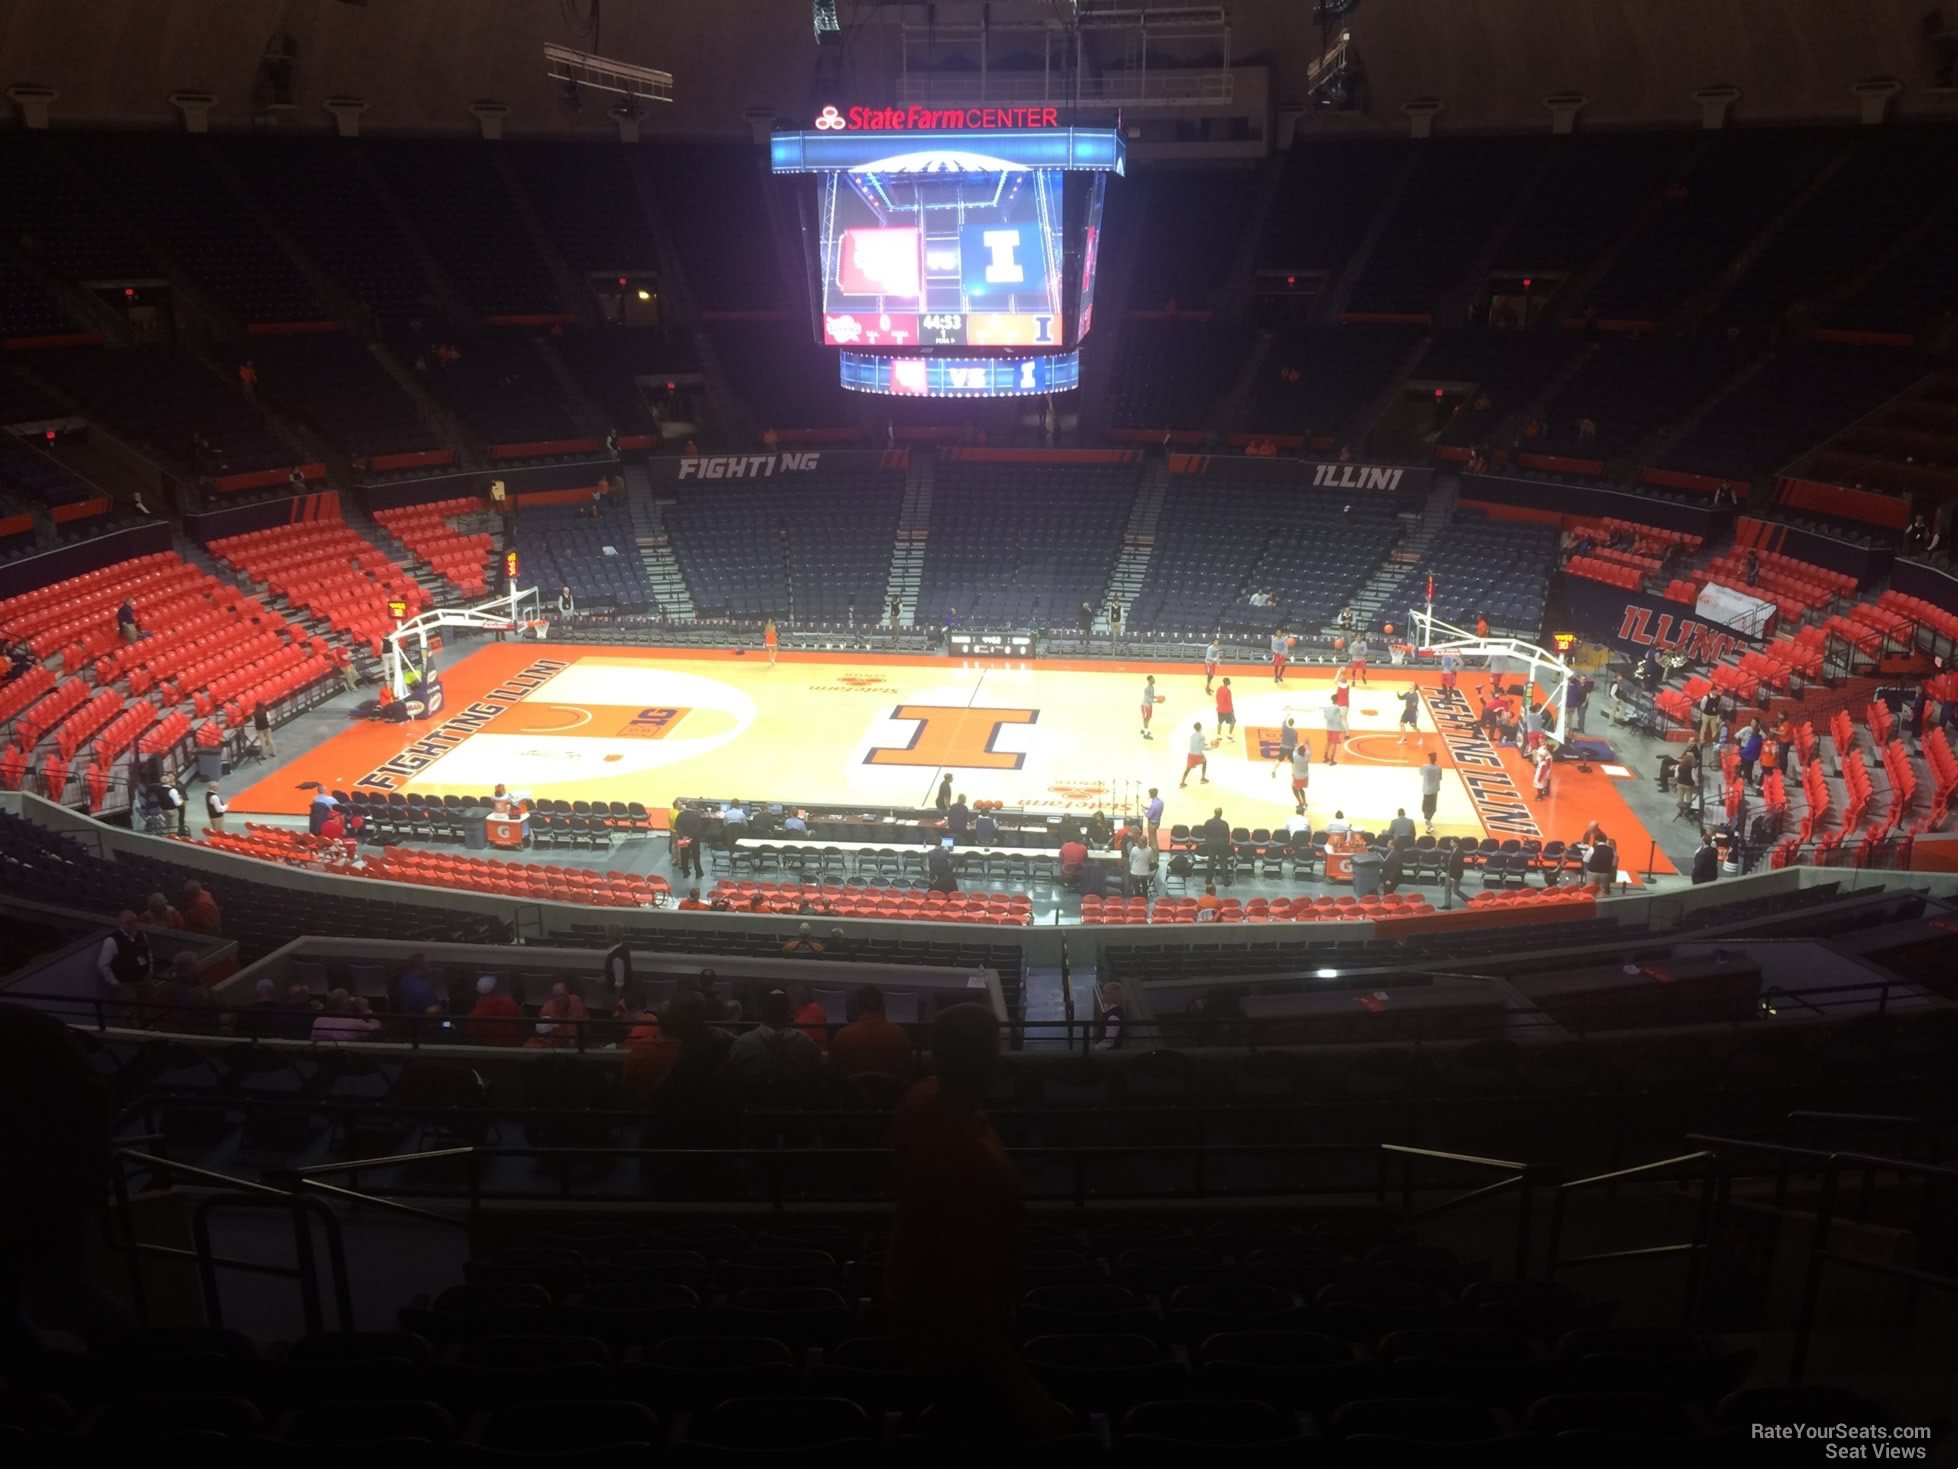 Section 224 at State Farm Center